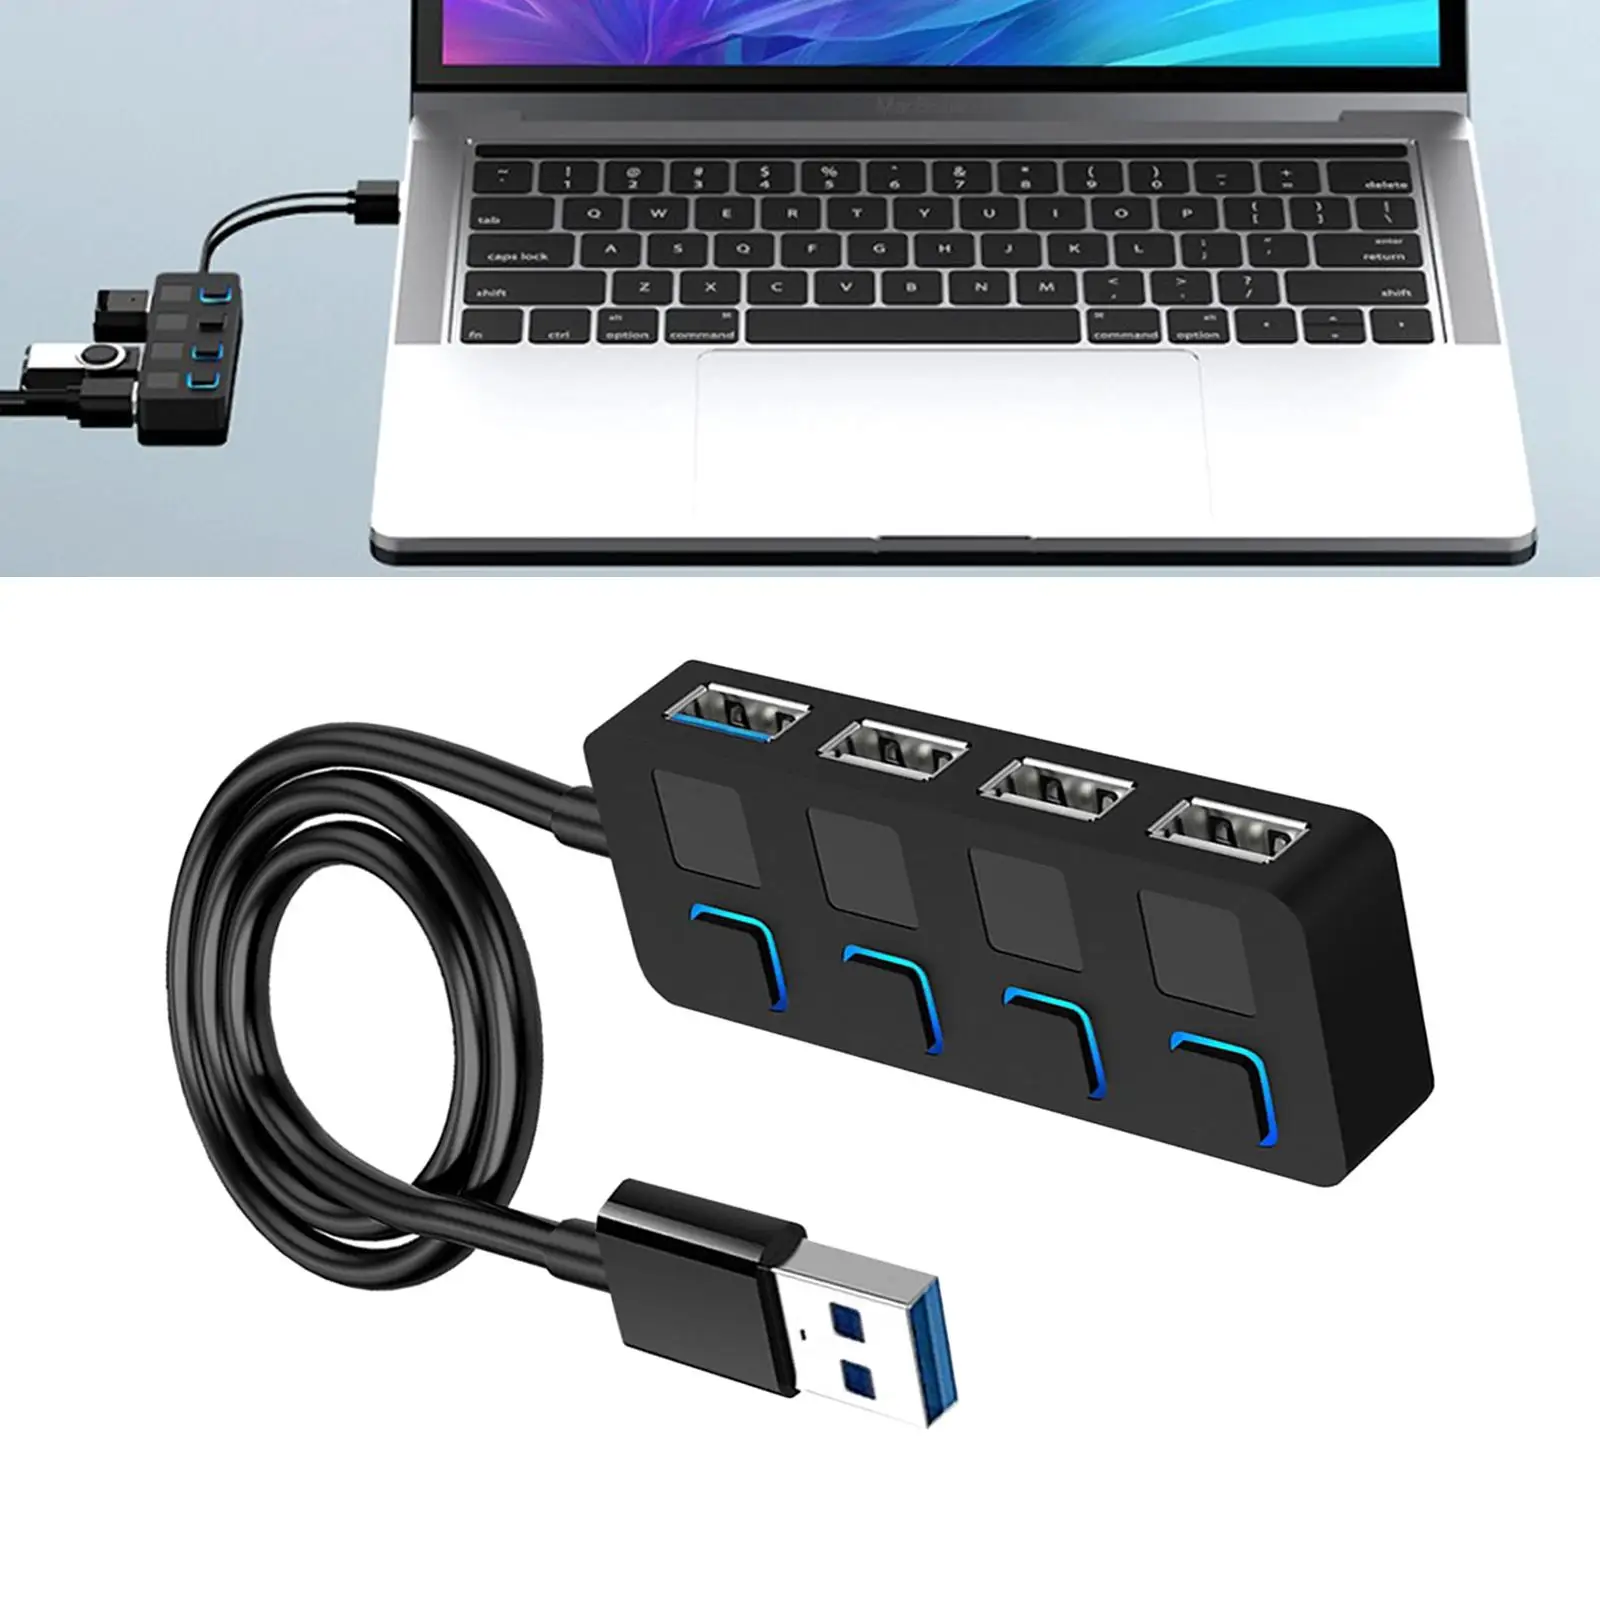 4 Port USB 3.0 Hub Data USB Hub for MacBook for iMac PC (Charging Not Supported)